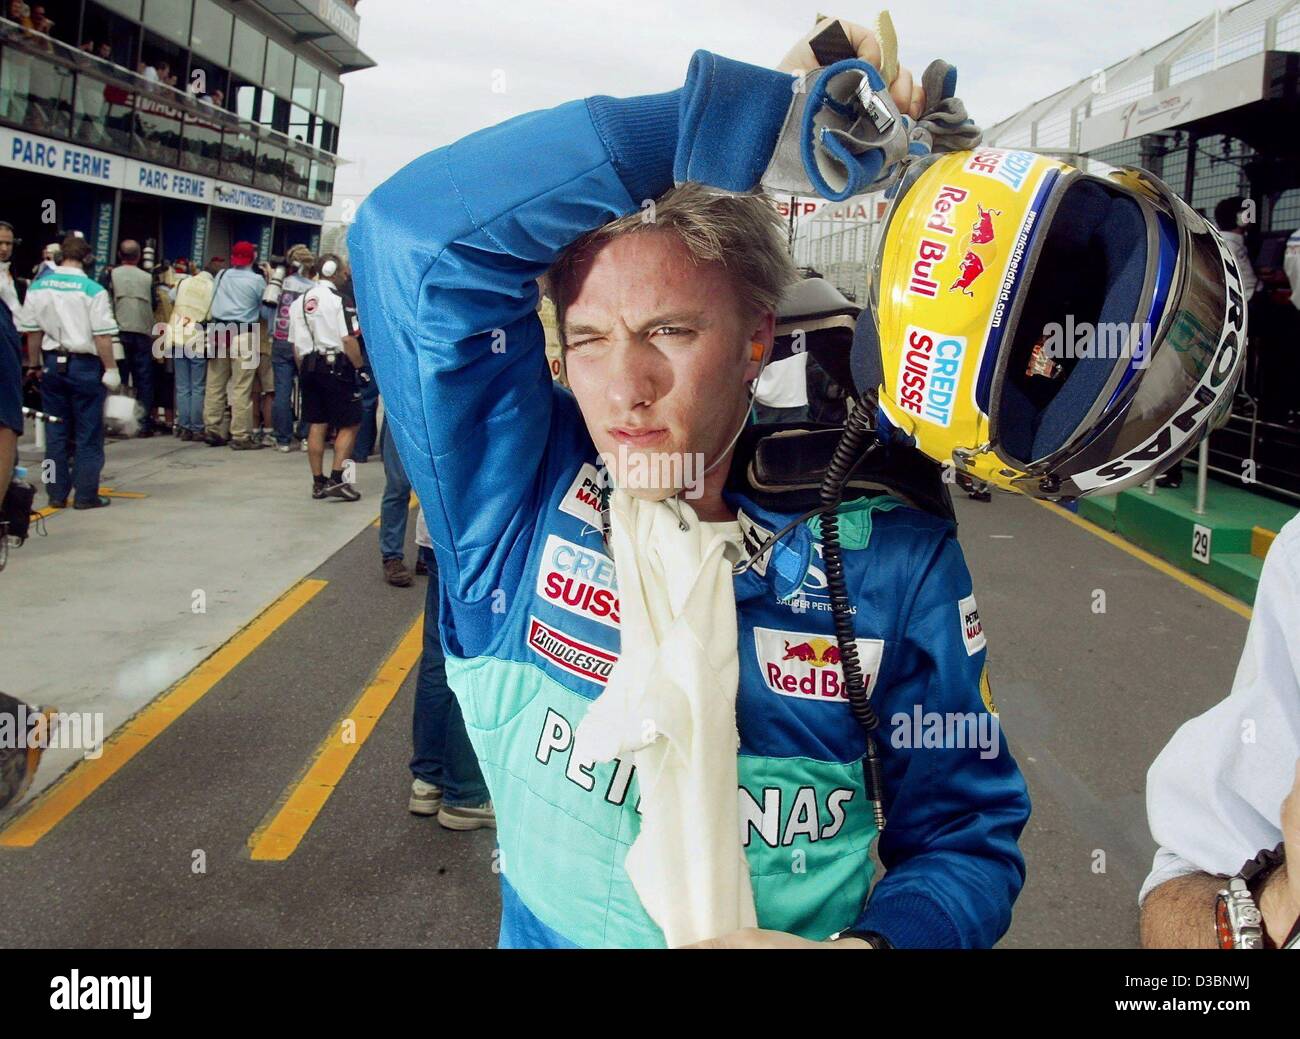 (dpa) - German formula one pilot Nick Heidfeld of the Sauber team takes off his helmet after the first qualifying training on the Albert Park race track in Melbourne, 7 March 2003. Heidfeld came in 12th. The Australian Grand Prix will kick off the formula one season on 9 March 2003 in Melbourne. Stock Photo